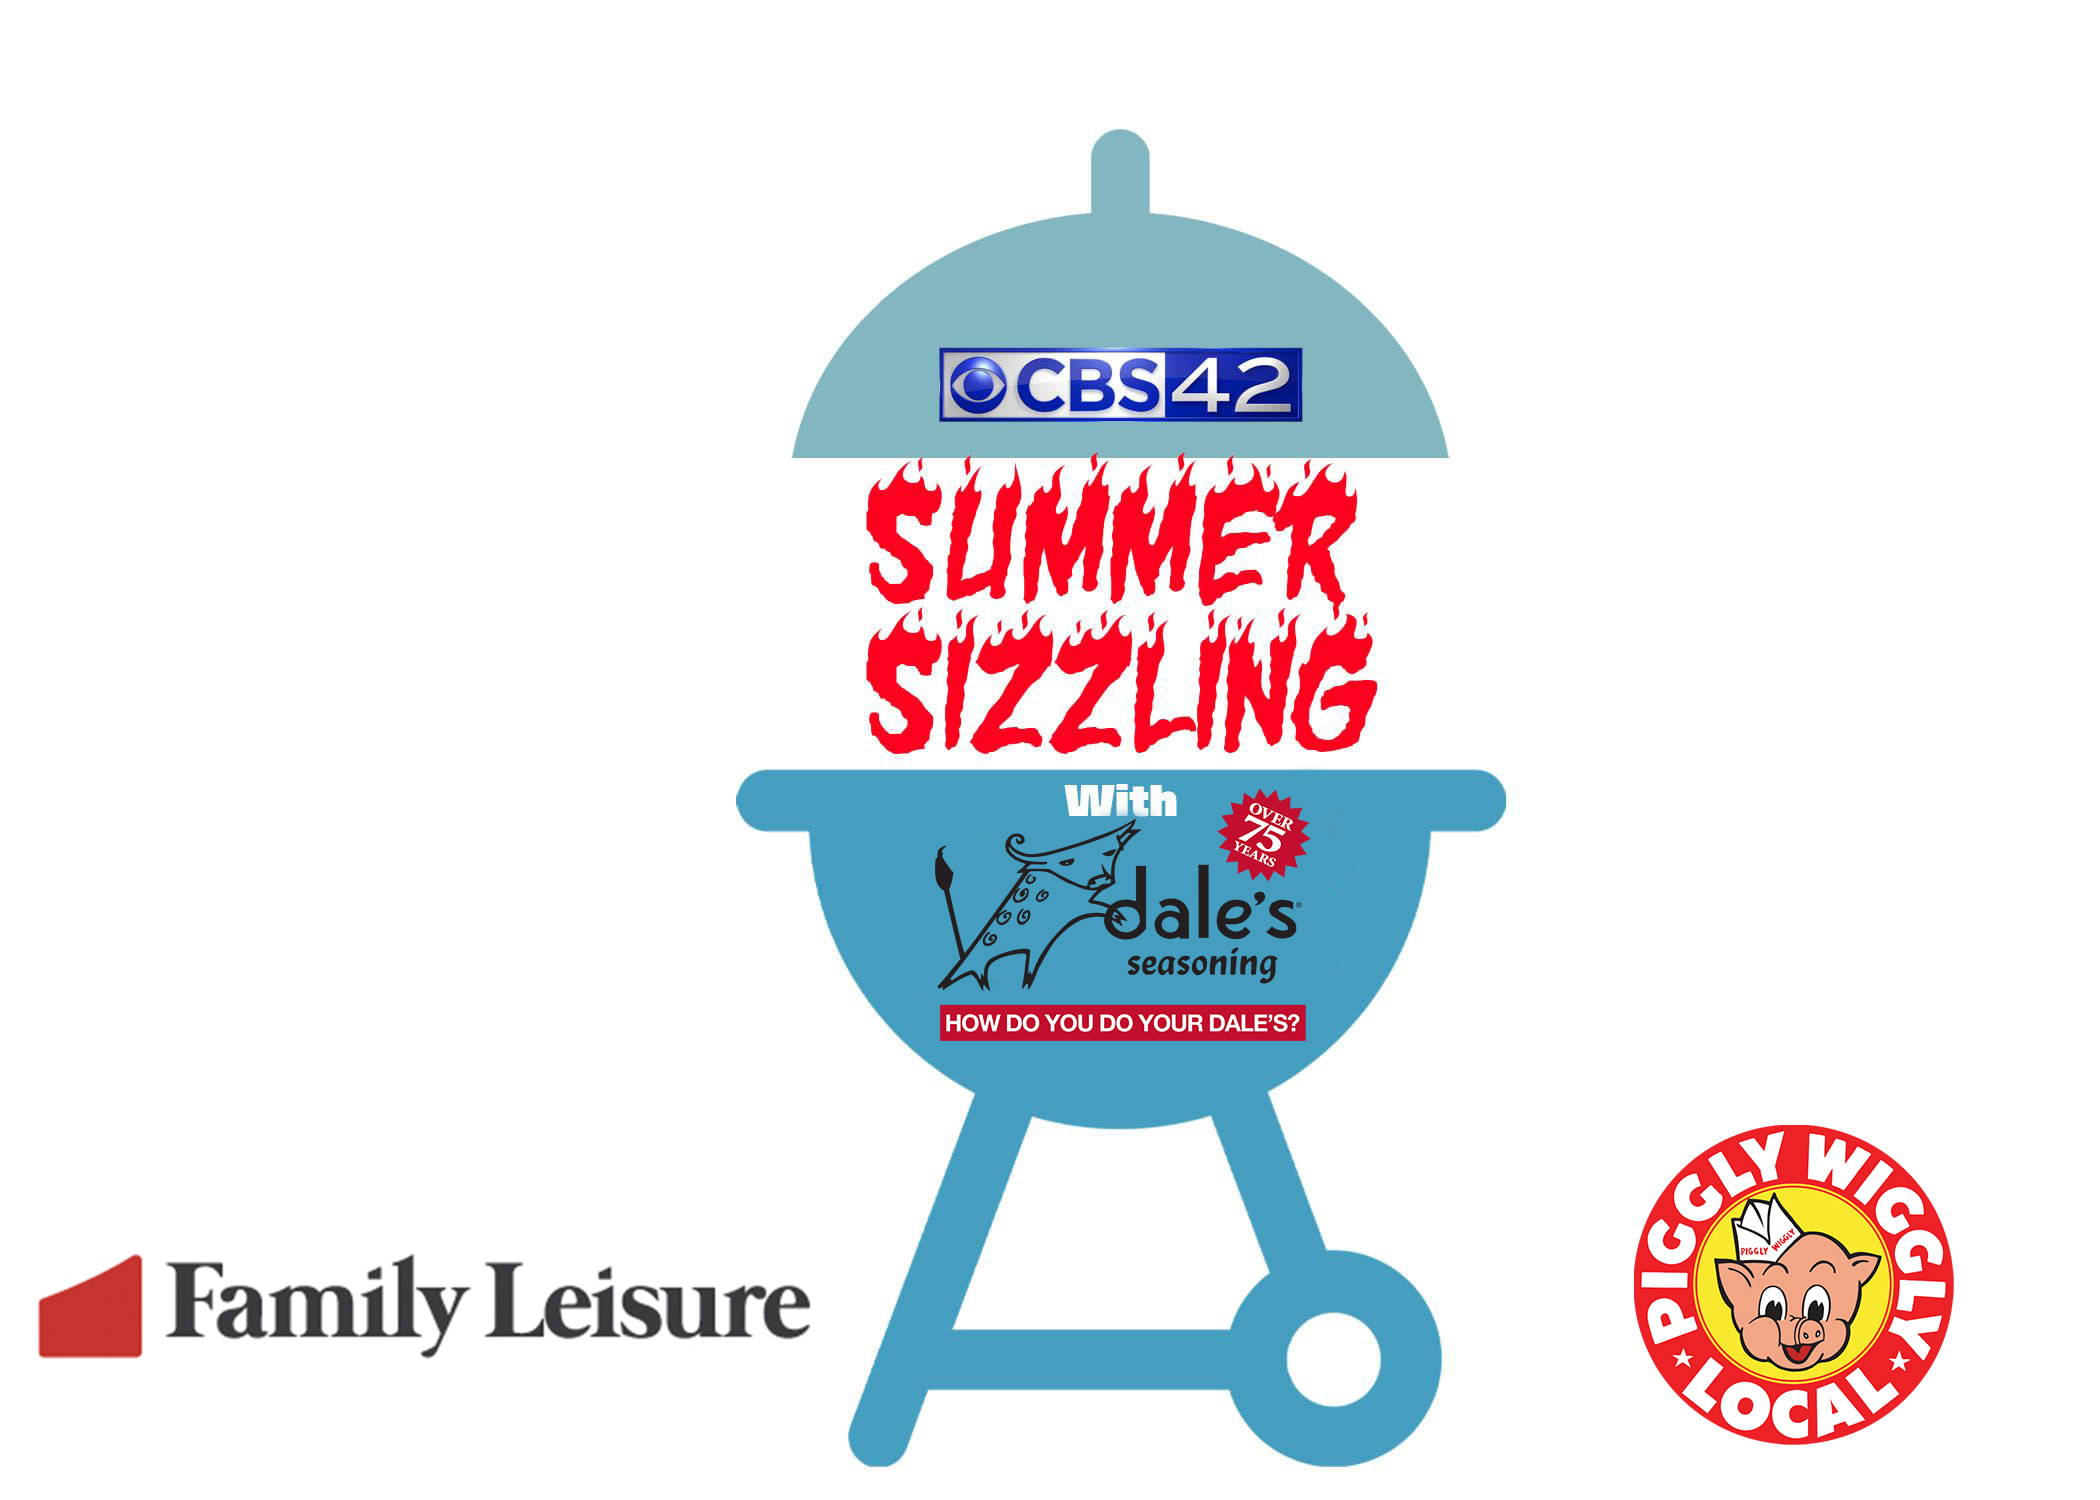 CBS 42 Summer Sizzling with Dale's Seasoning